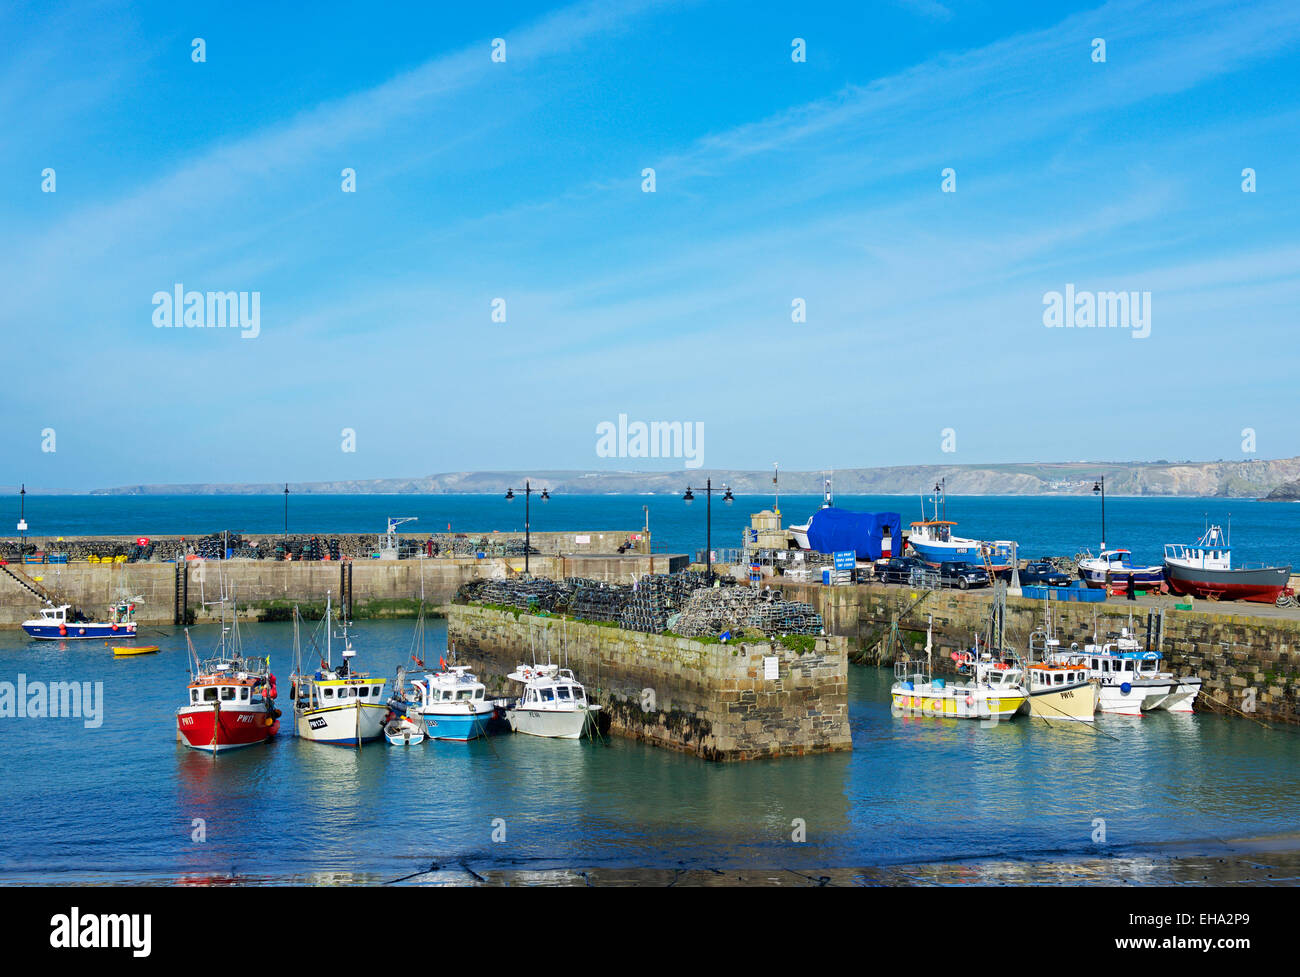 Fishing boats in the harbour at Newquay, Cornwall, England UK Stock Photo